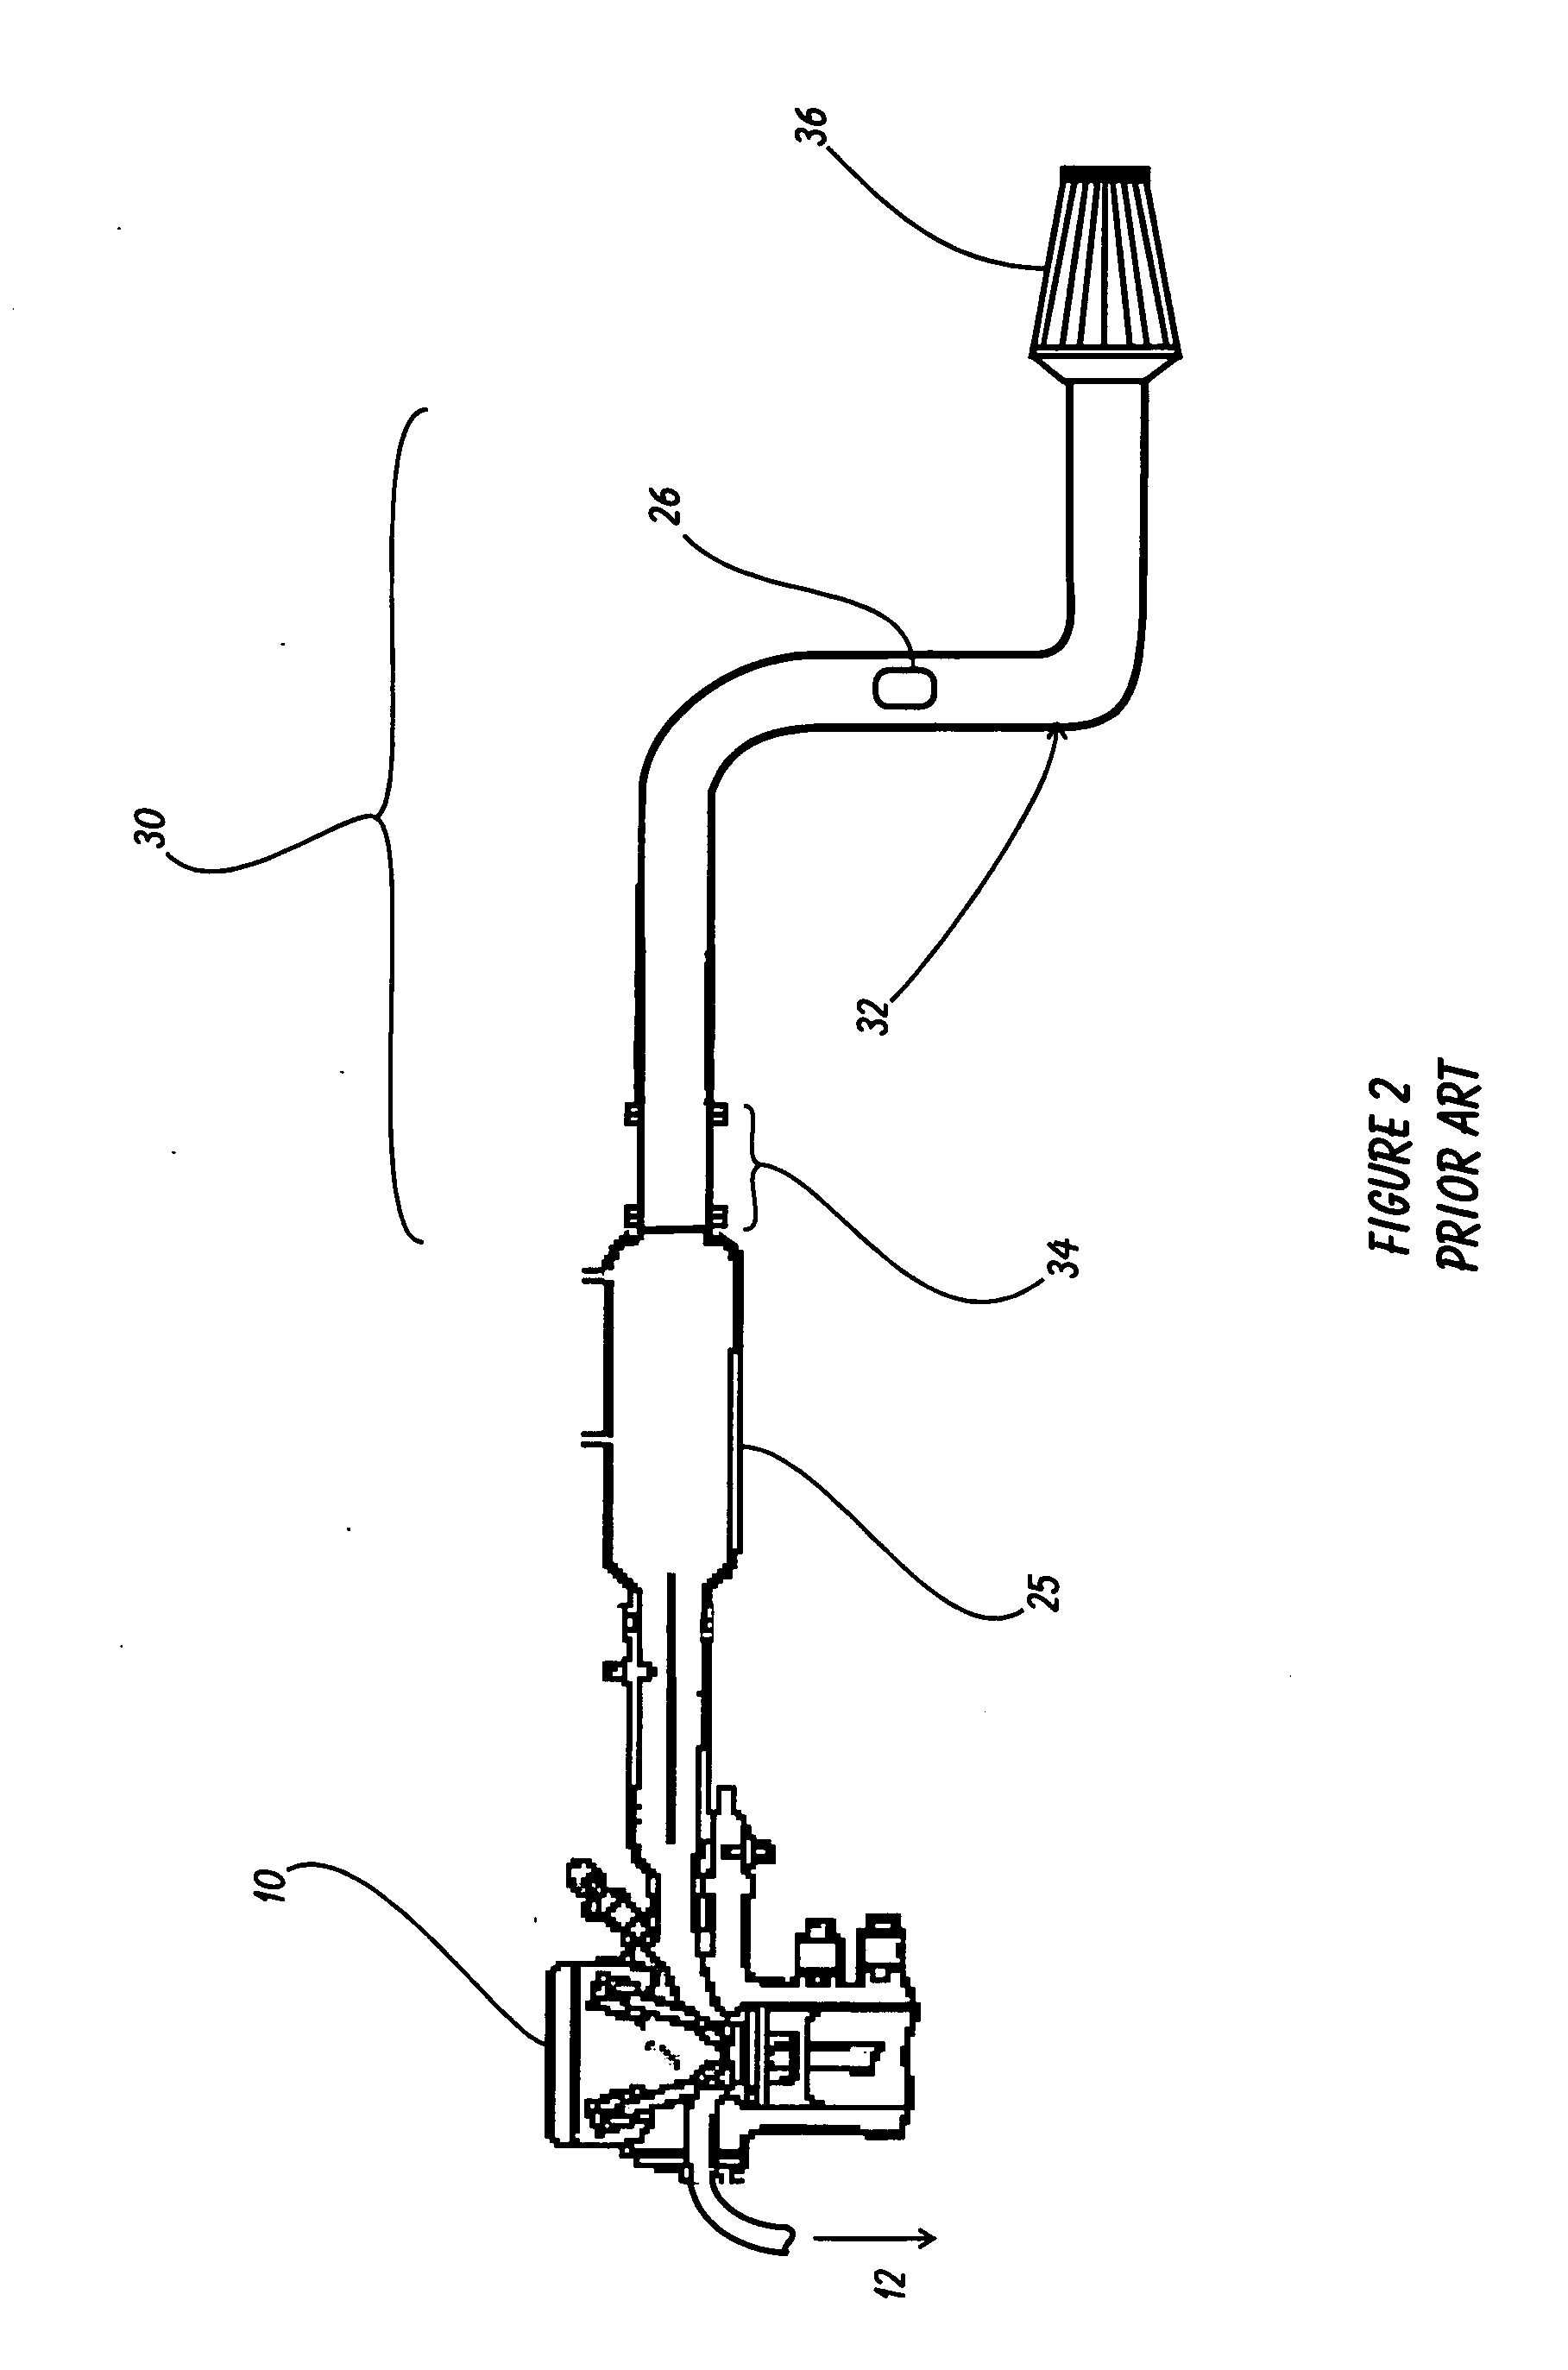 Calibration method for air intake tracts for internal combustion engines